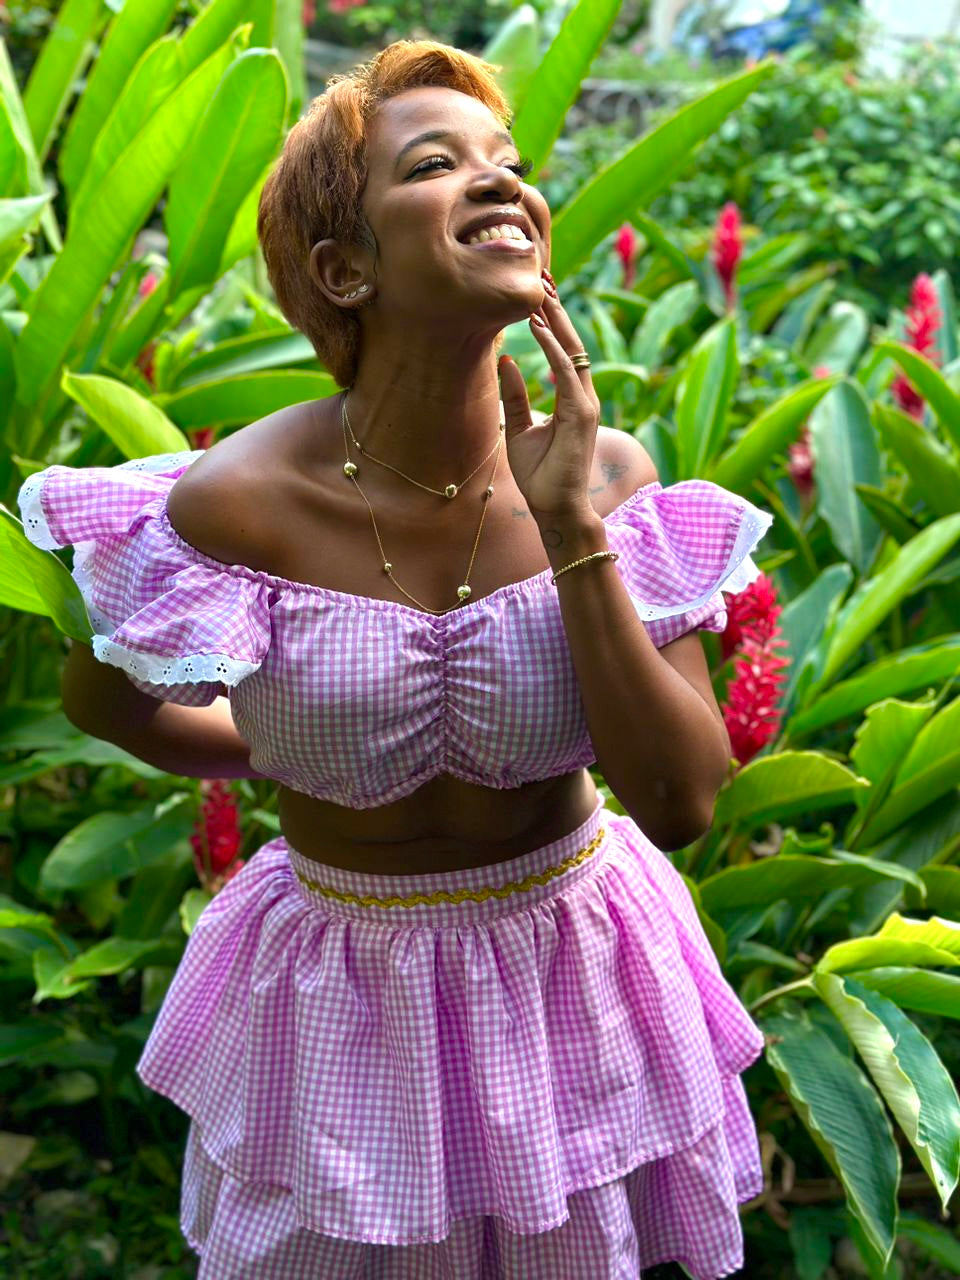 CariCom Barbie set of ruffle skirt with matching pink ruffle crop top with gold and white accents, modeled by Miss_Soy